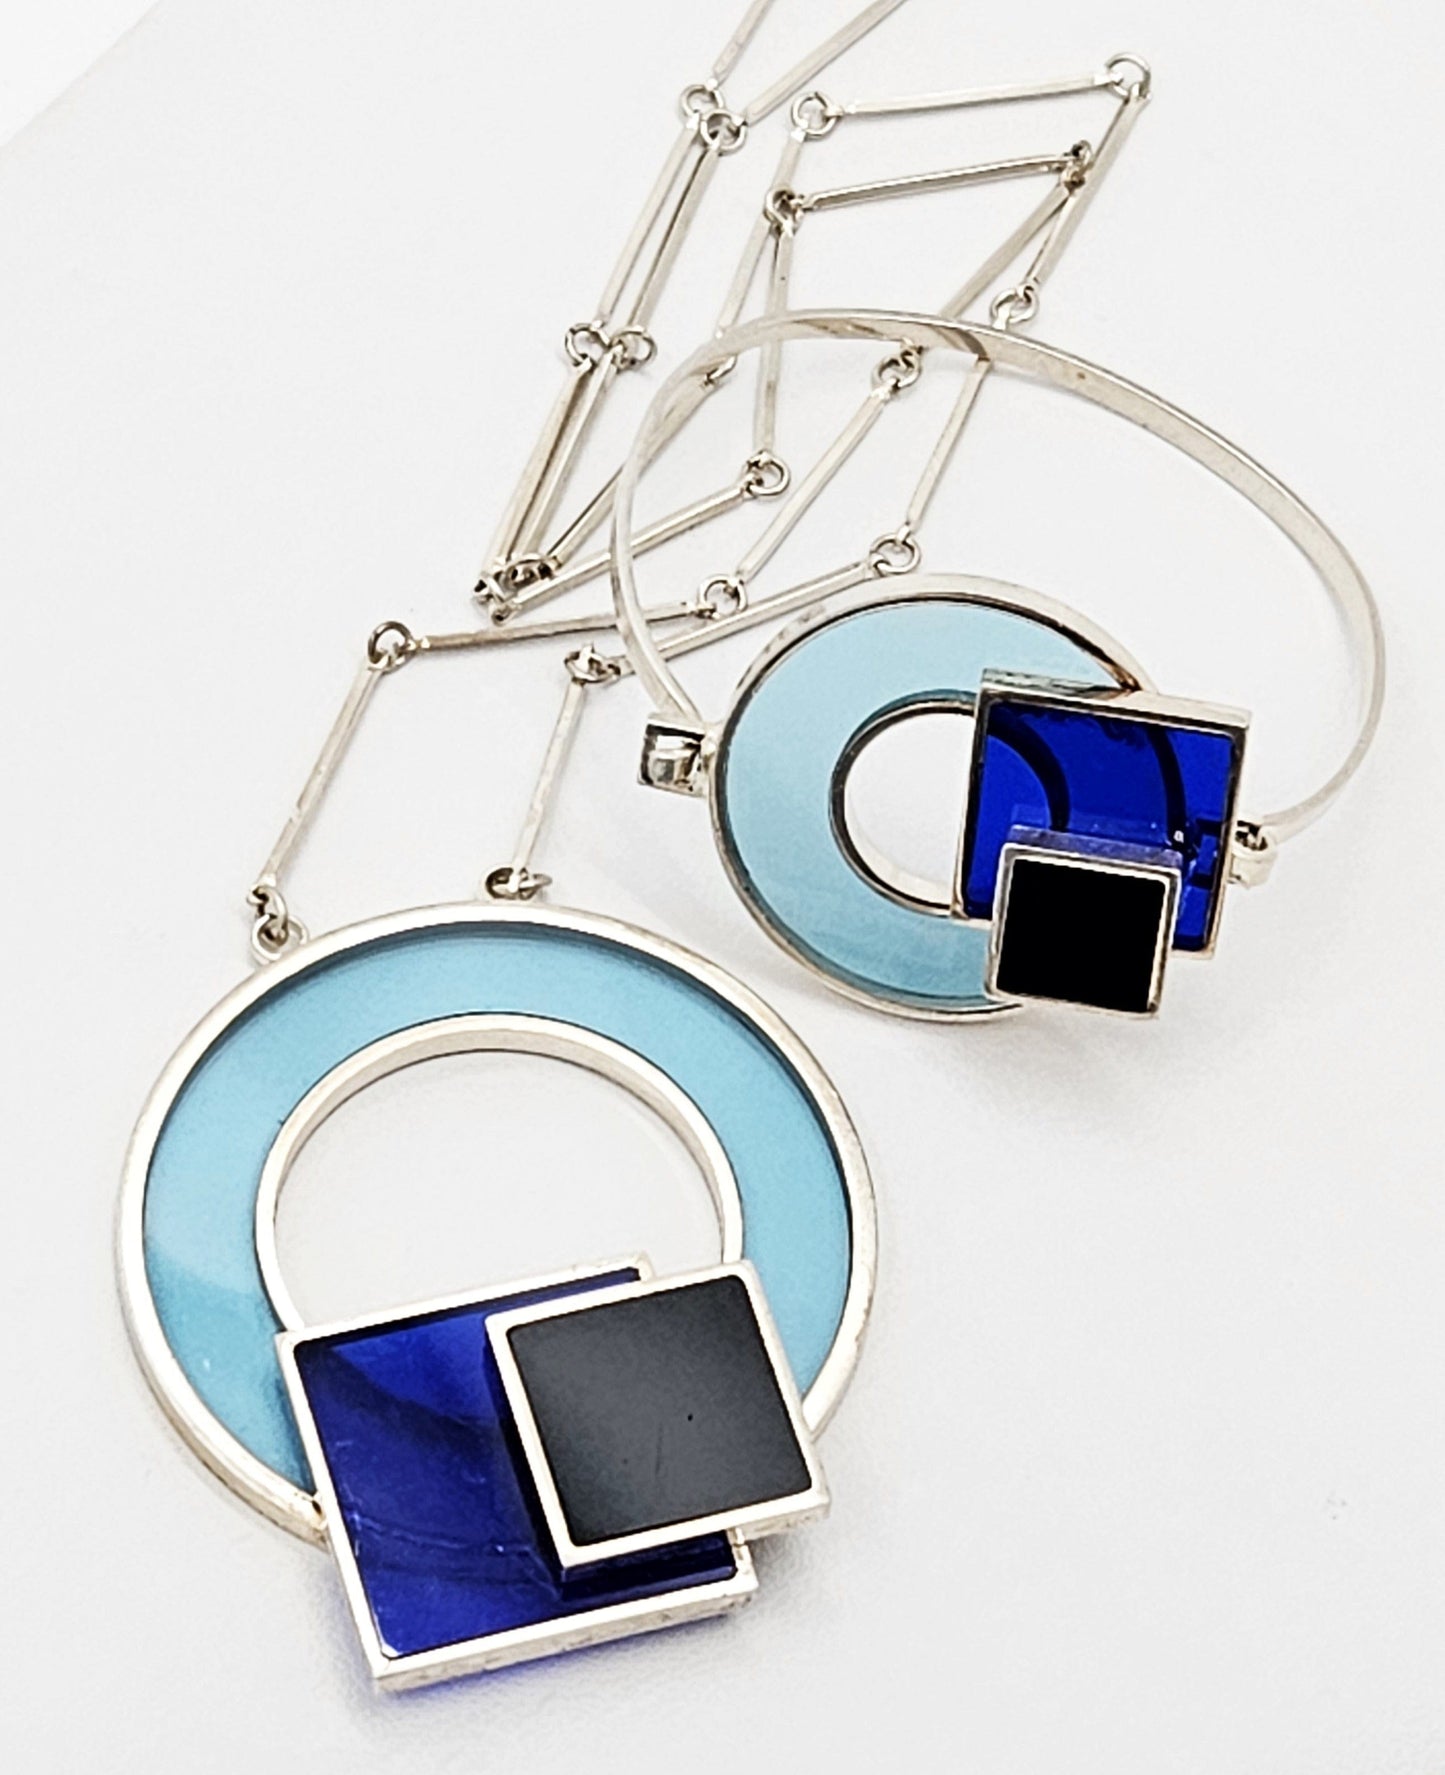 Artisan Stain Glass Bracelet & Necklace Set Jewelry Artisan Made Stain Glass and Sterling Silver Modernist Necklace and Bracelet Set